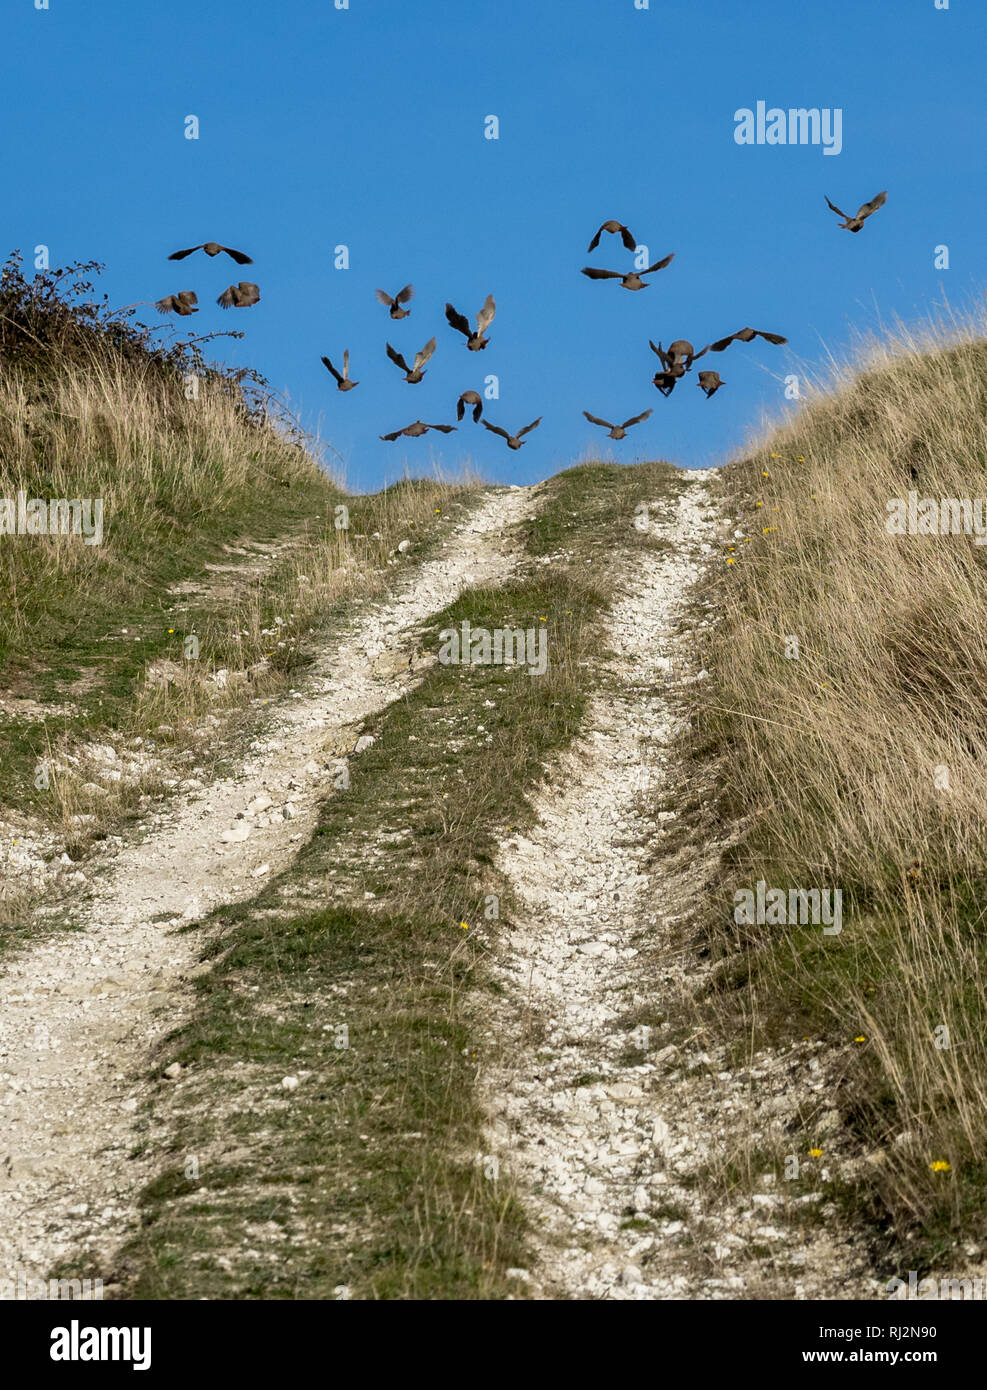 A flock of pheasants taking off escaping from brow of hill into a clear blue autumn sky with track path road leading into frame, UK Stock Photo